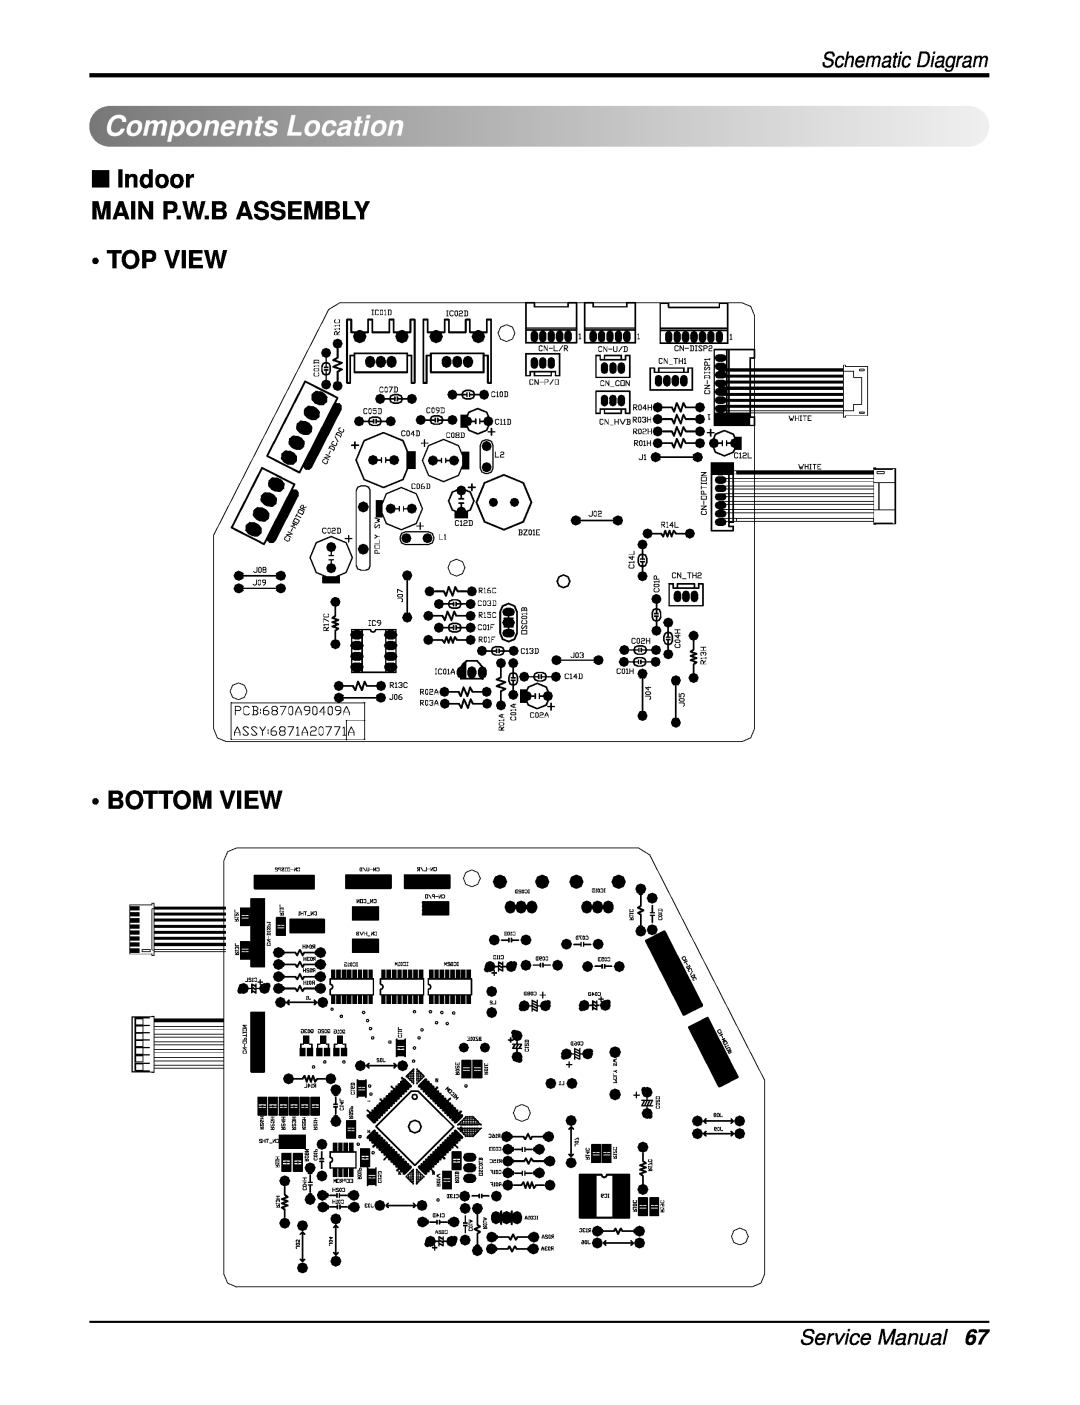 Heat Controller DMH09SB-0 ComponentsLocation, Indoor MAIN P.W.B ASSEMBLY TOP VIEW, Bottom View, Schematic Diagram 